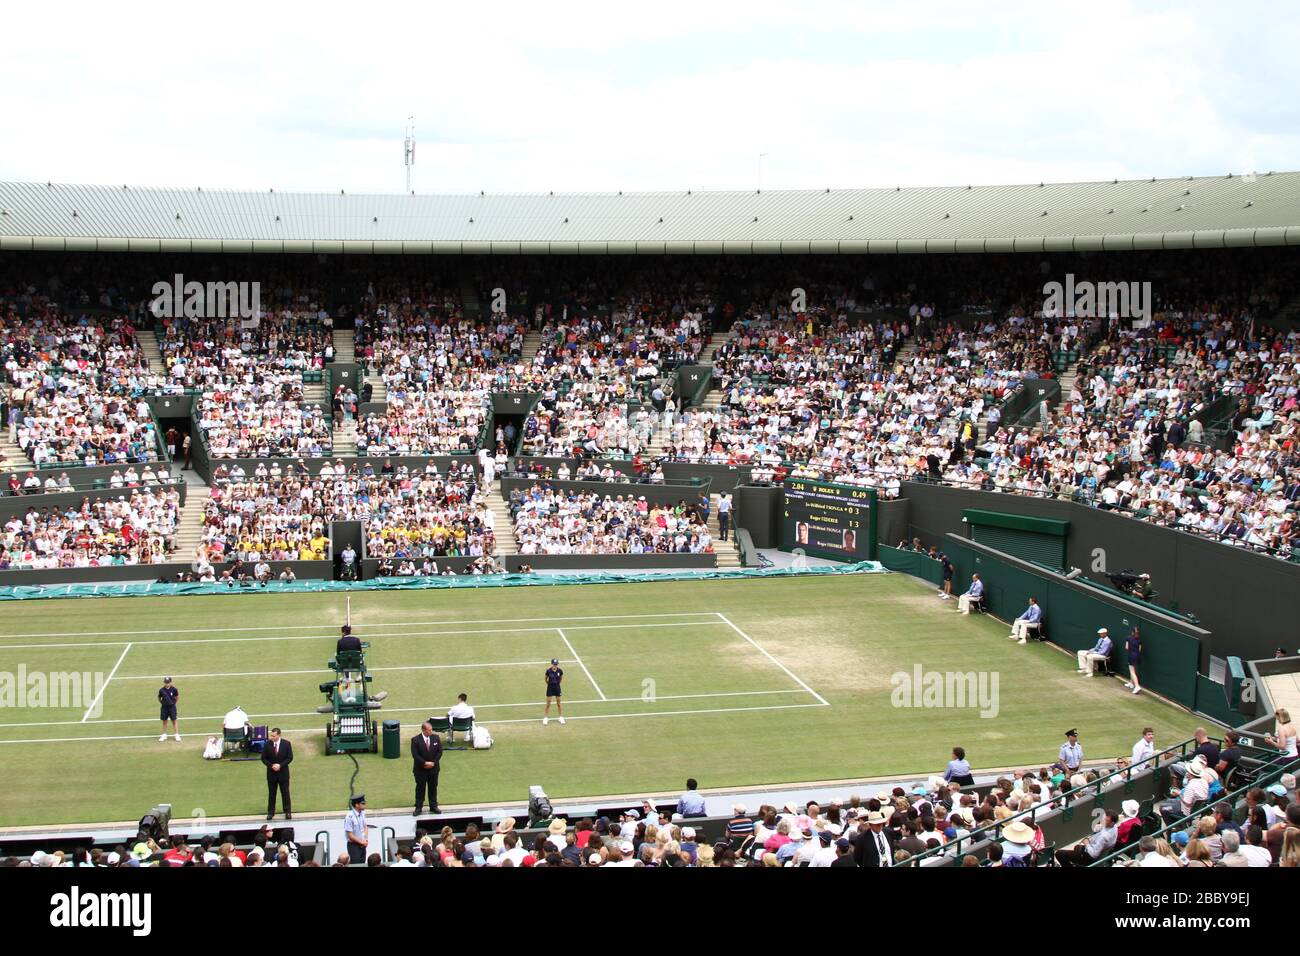 WIMBLEDON TENNIS CHAMPIONSHIPS CANCELLED DUE TO THE CORONAVIRUS COVID-19 PANDEMIC. 2020 ALL ENGLAND WIMBLEDON LAWN TENNIS CLUB CANCELLED THE CHAMPIONSHIPS. Stock Photo